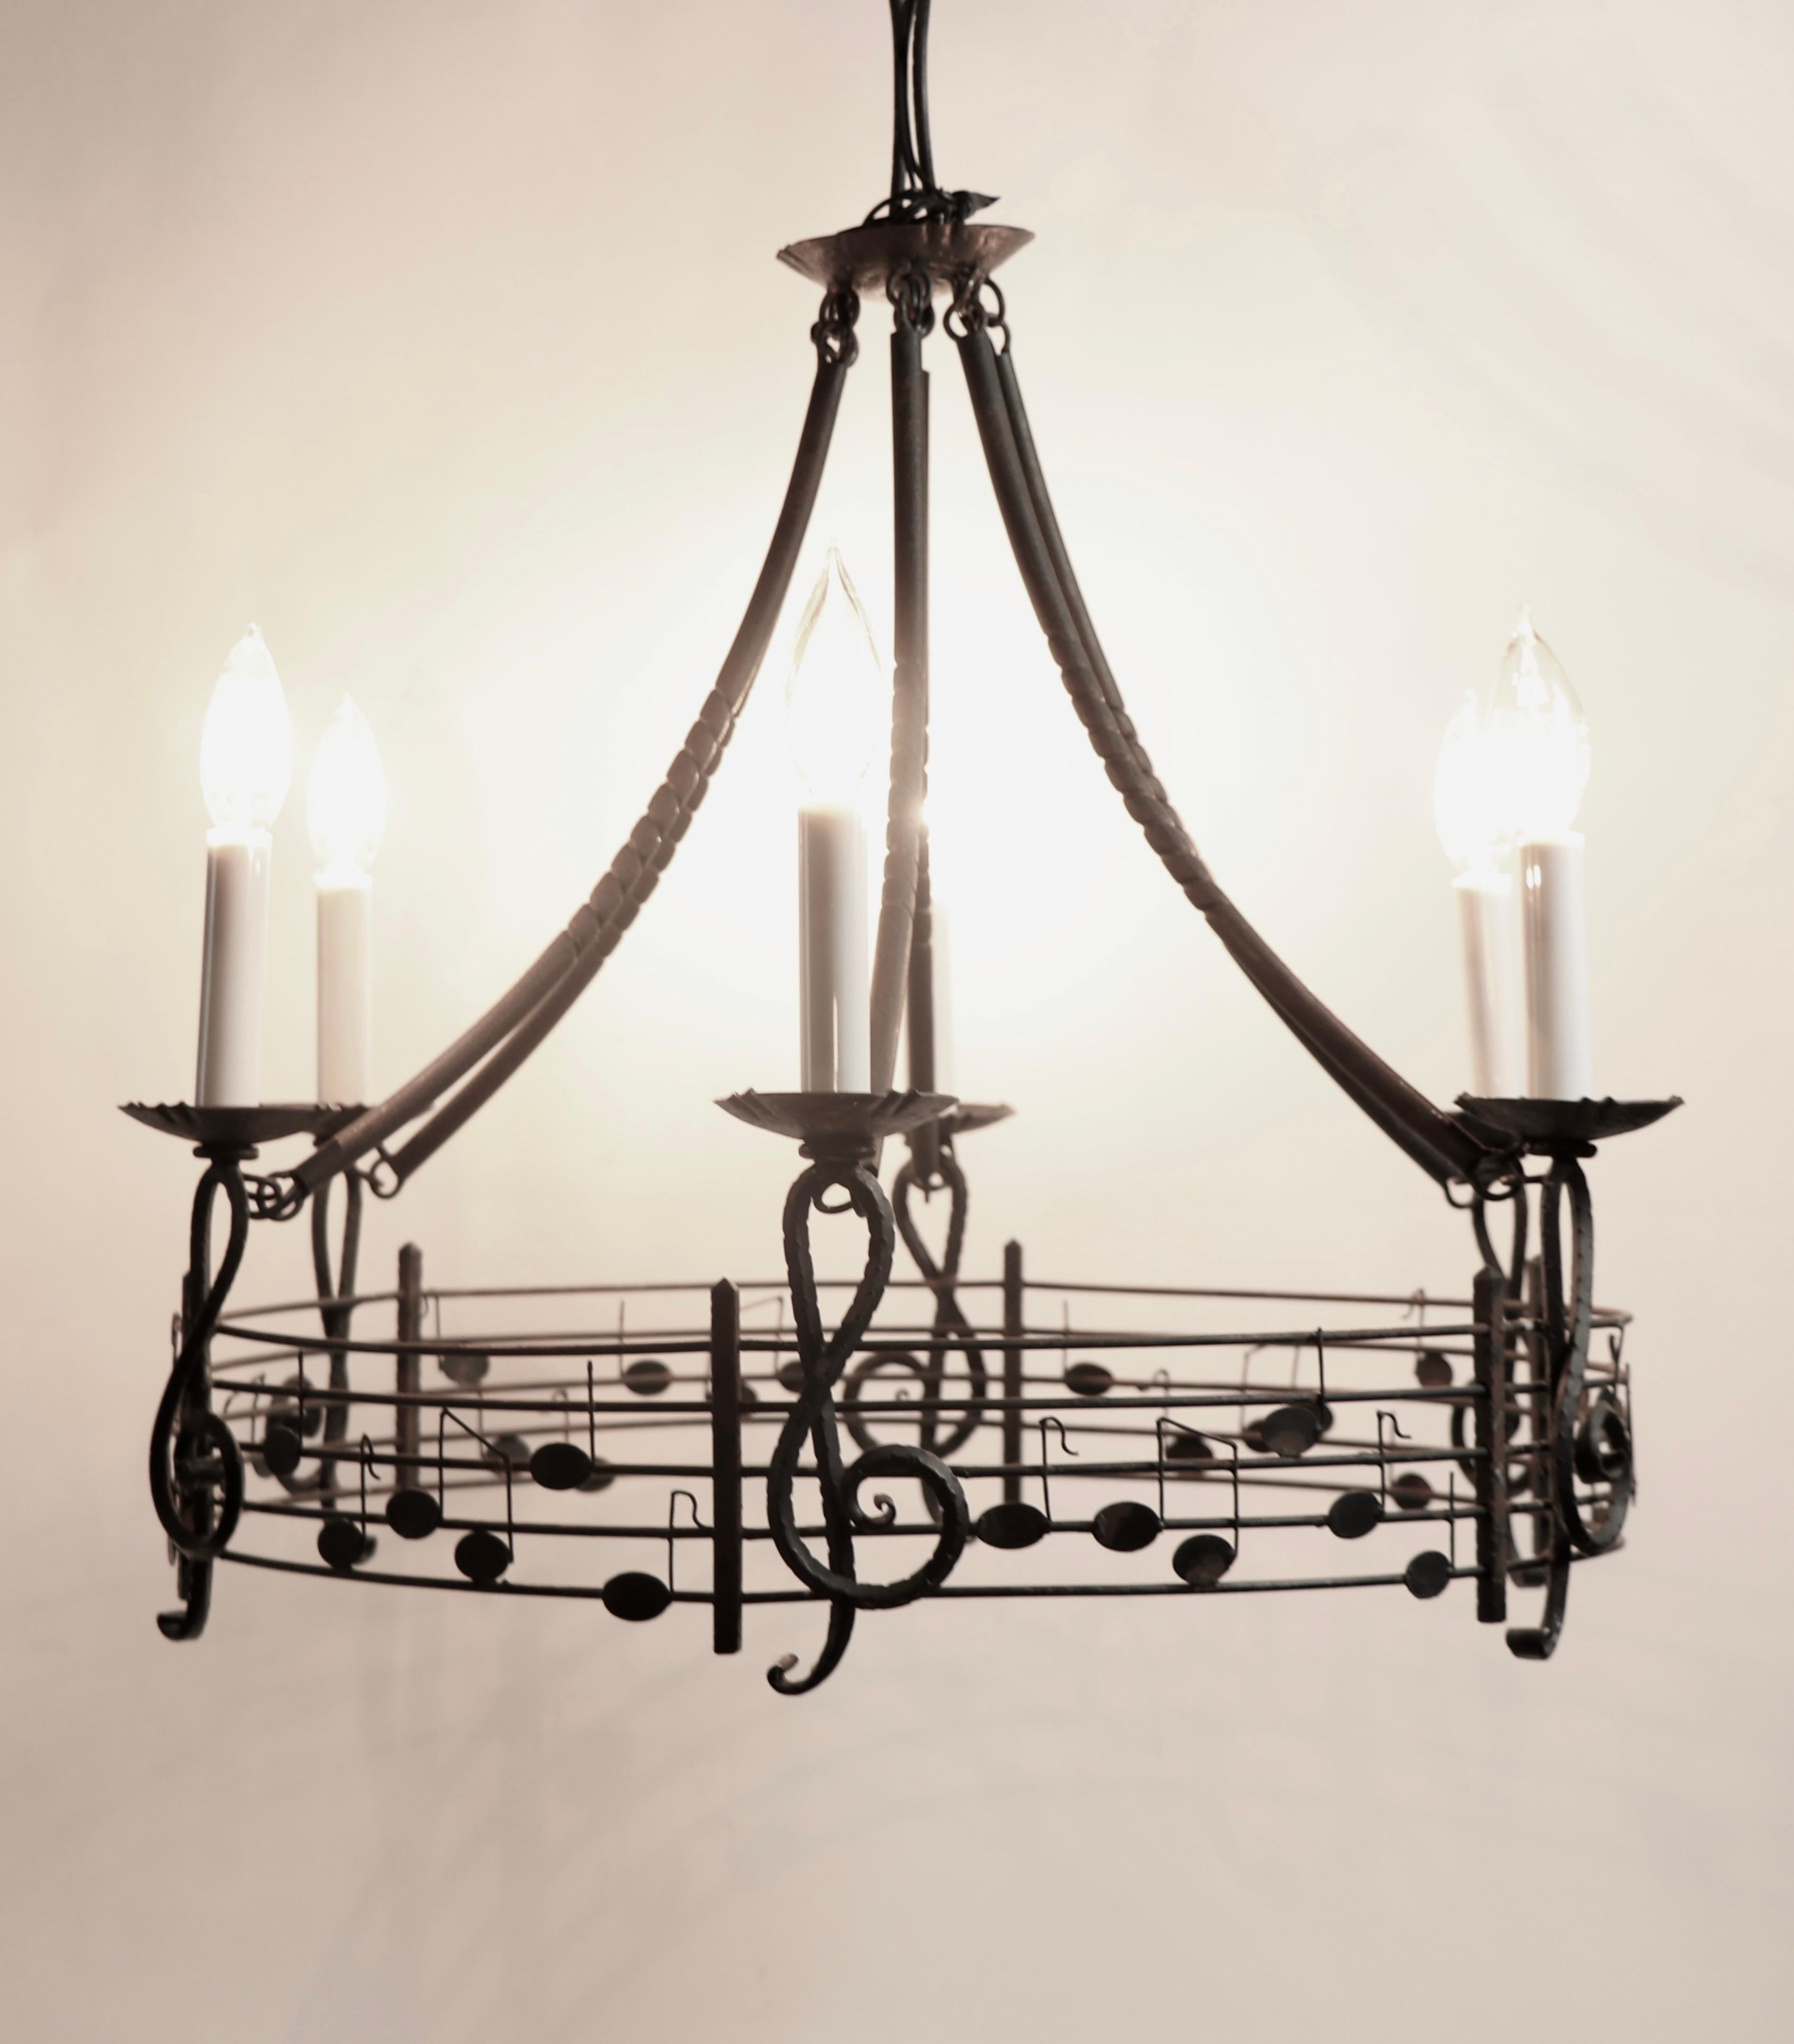 Musical Motif Brutalist Wrought Iron Chandelier Made in Hungary For Sale 2